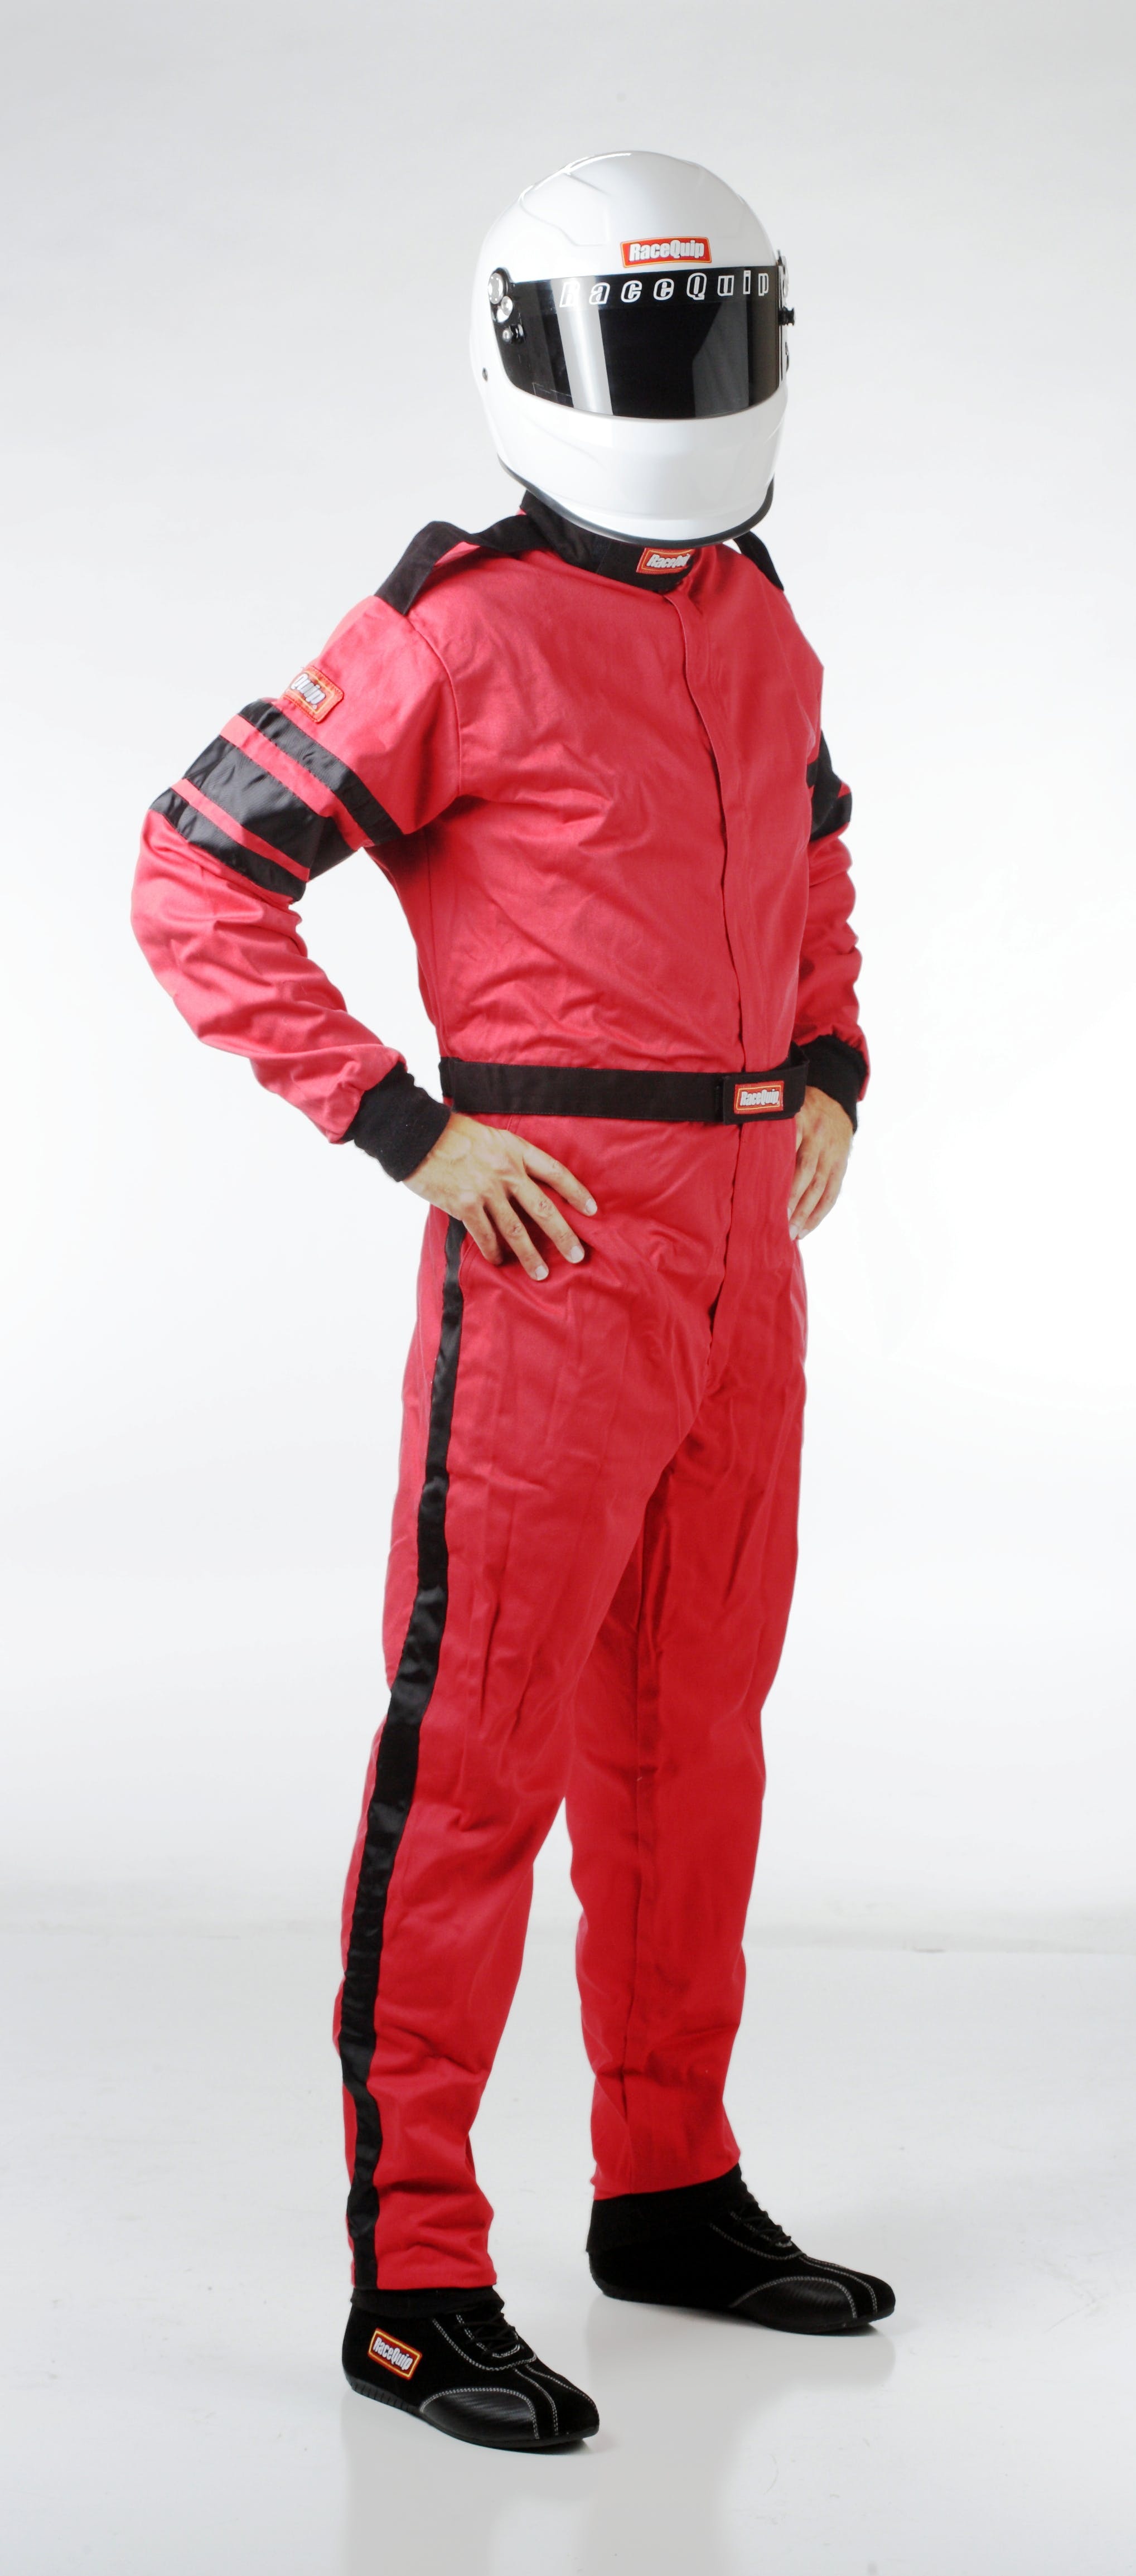 RaceQuip 110016 SFI-1 Pyrovatex One-Piece Single-Layer Racing Fire Suit (Red, X-Large)